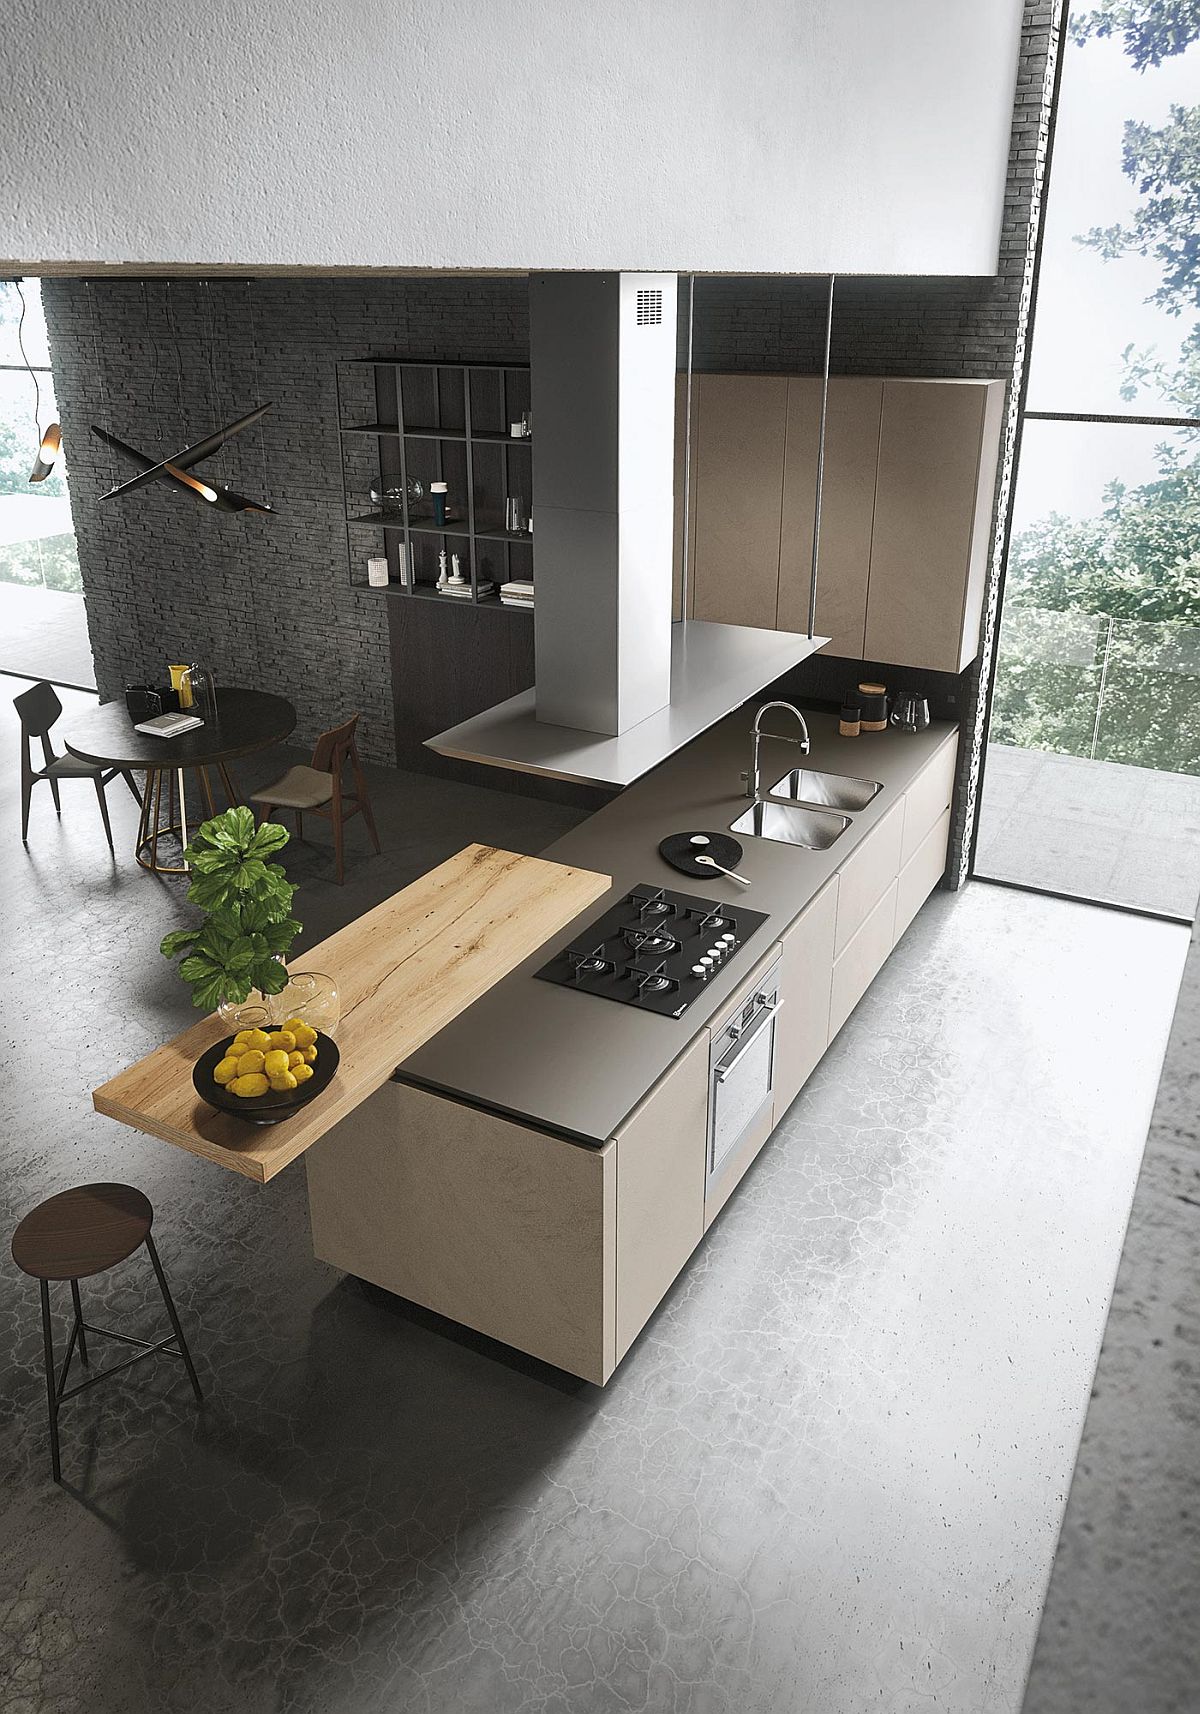 Standalone wooden attachment to the kitchen island can be used in a variety of ways